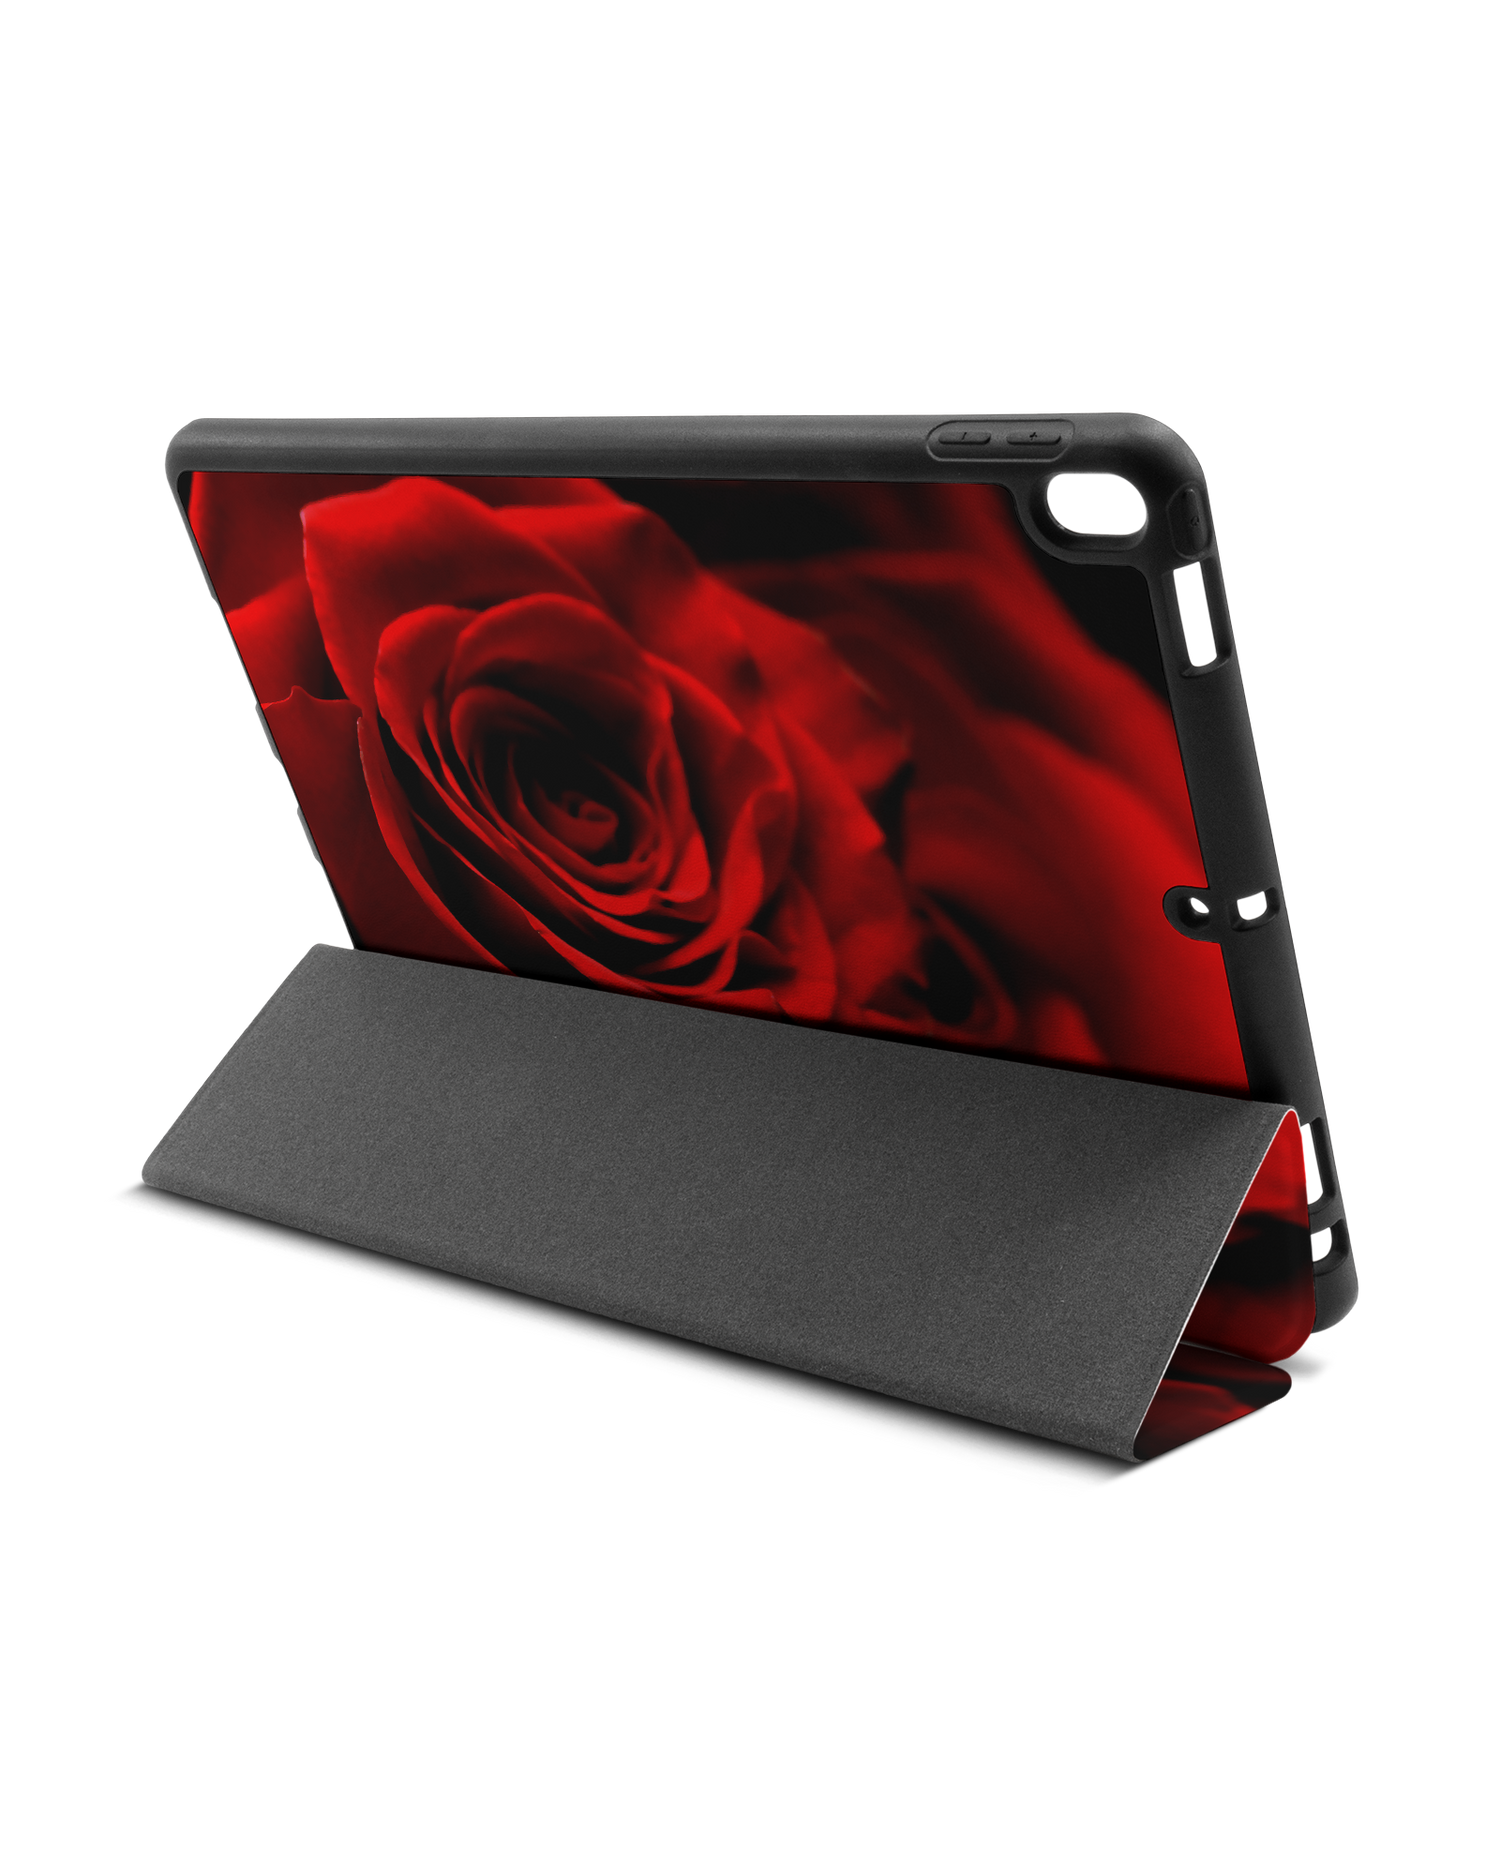 Red Roses iPad Case with Pencil Holder Apple iPad Pro 10.5